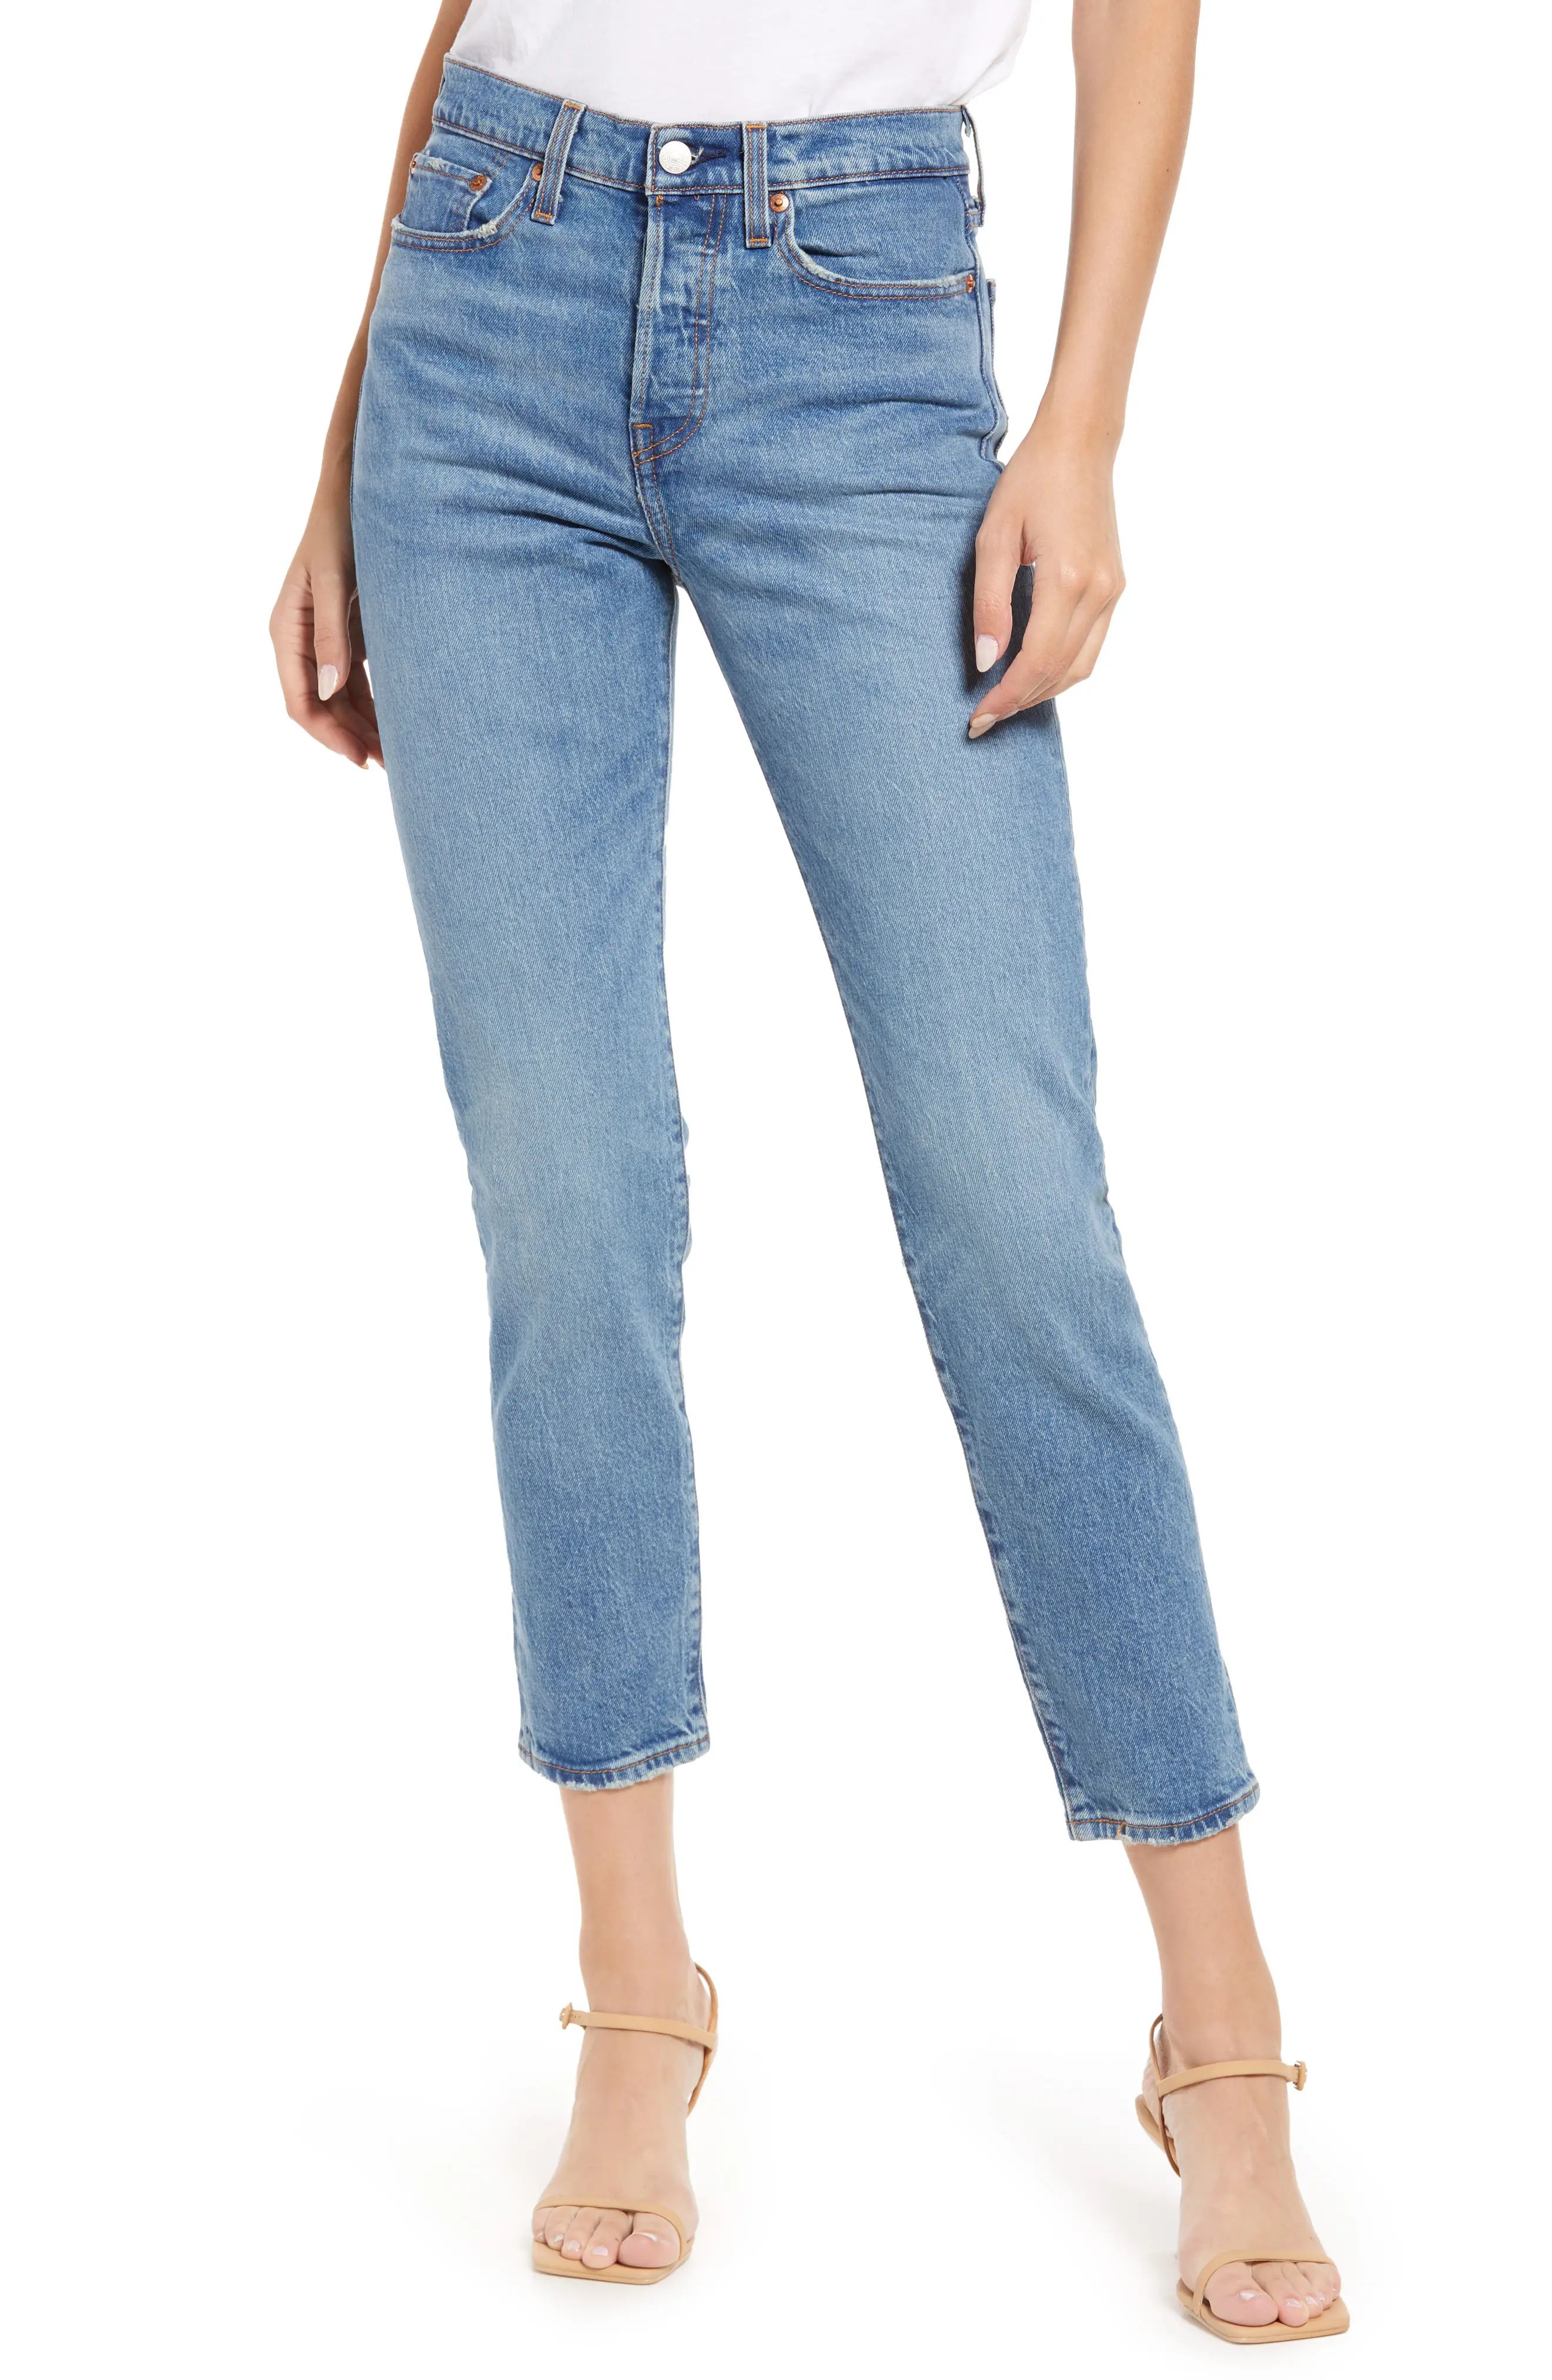 levi's Wedgie Icon Fit High Waist Straight Leg Jeans in These Dreams at Nordstrom, Size 30 | Nordstrom